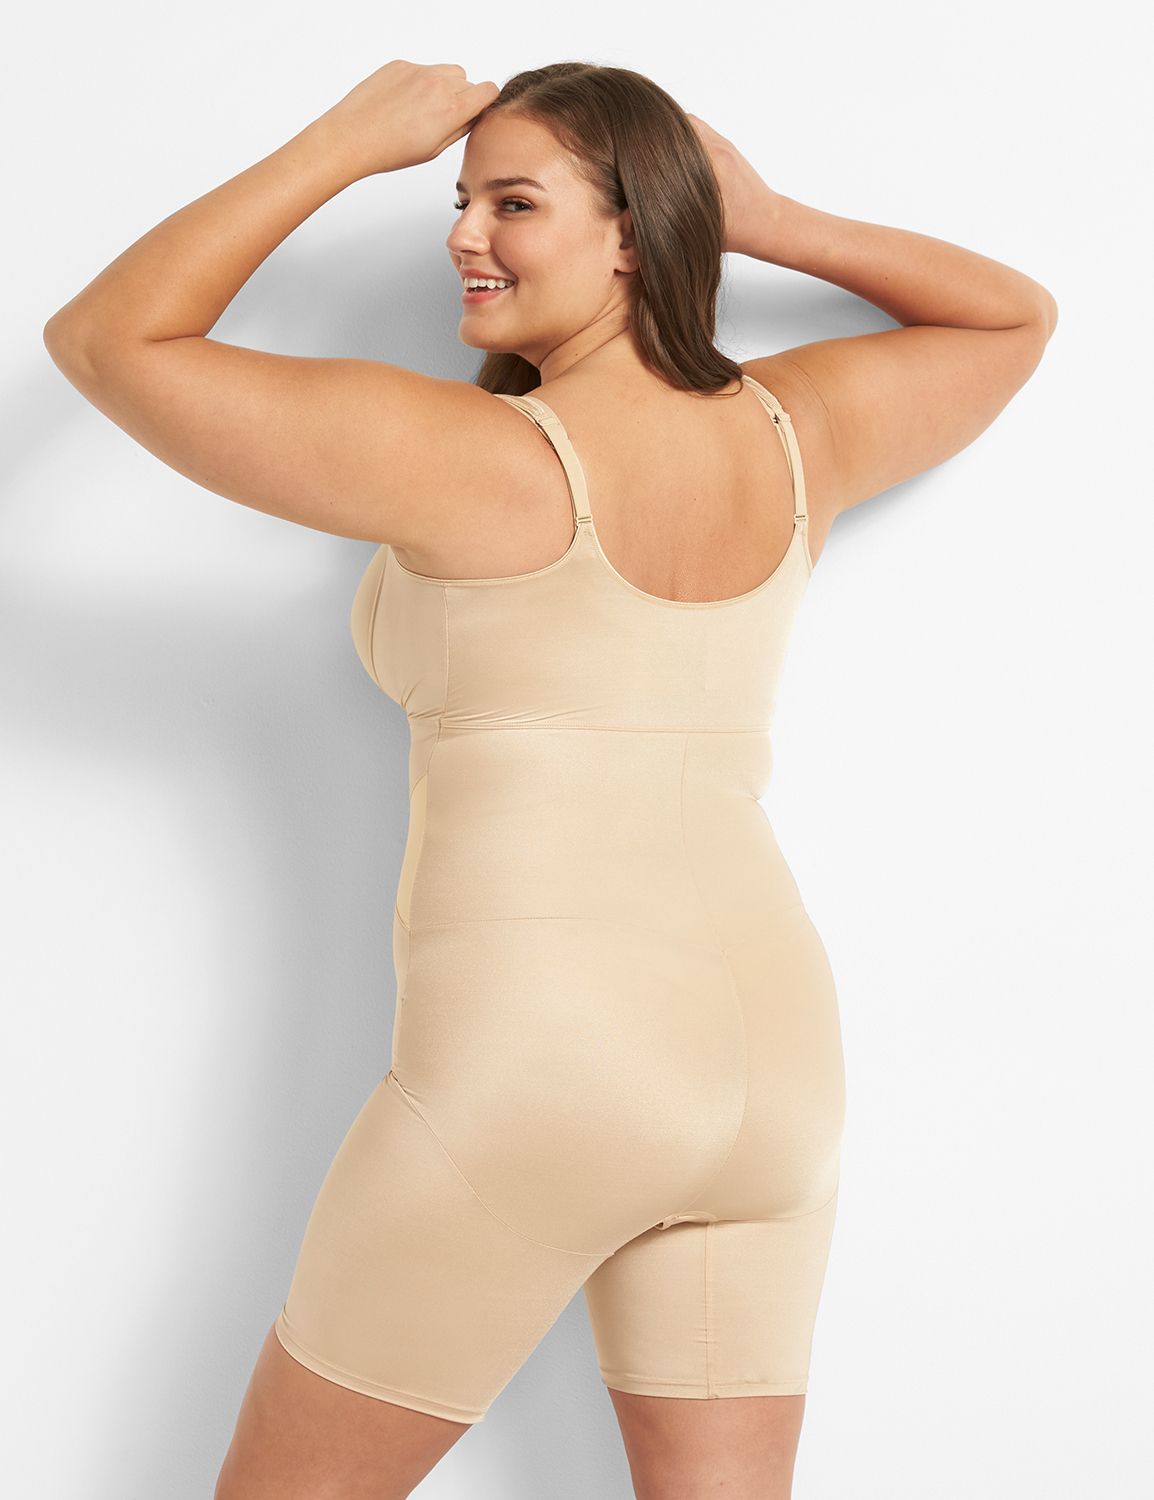 ASSORTED Body Shapers - Size 34 to 48 (B-C)